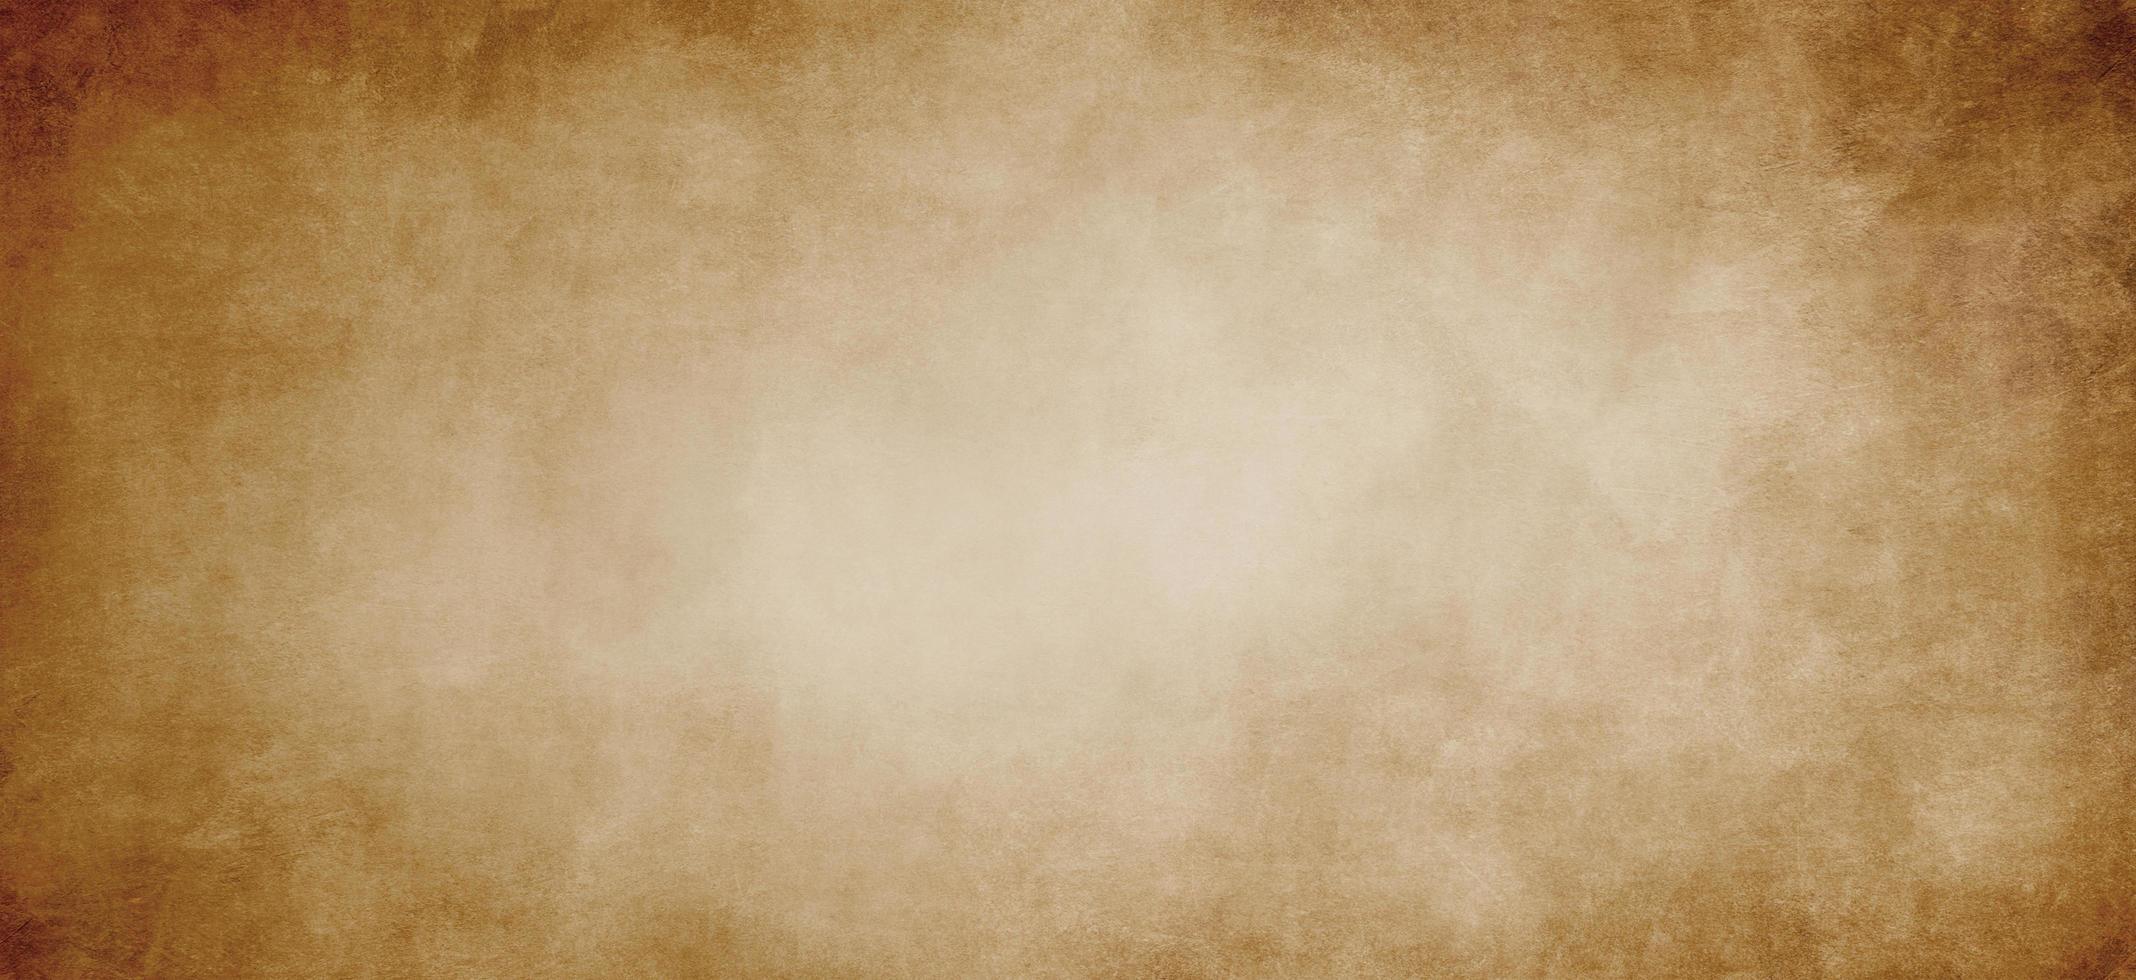 Pale brown vintage paper texture background 2124233 Stock Photo at Vecteezy